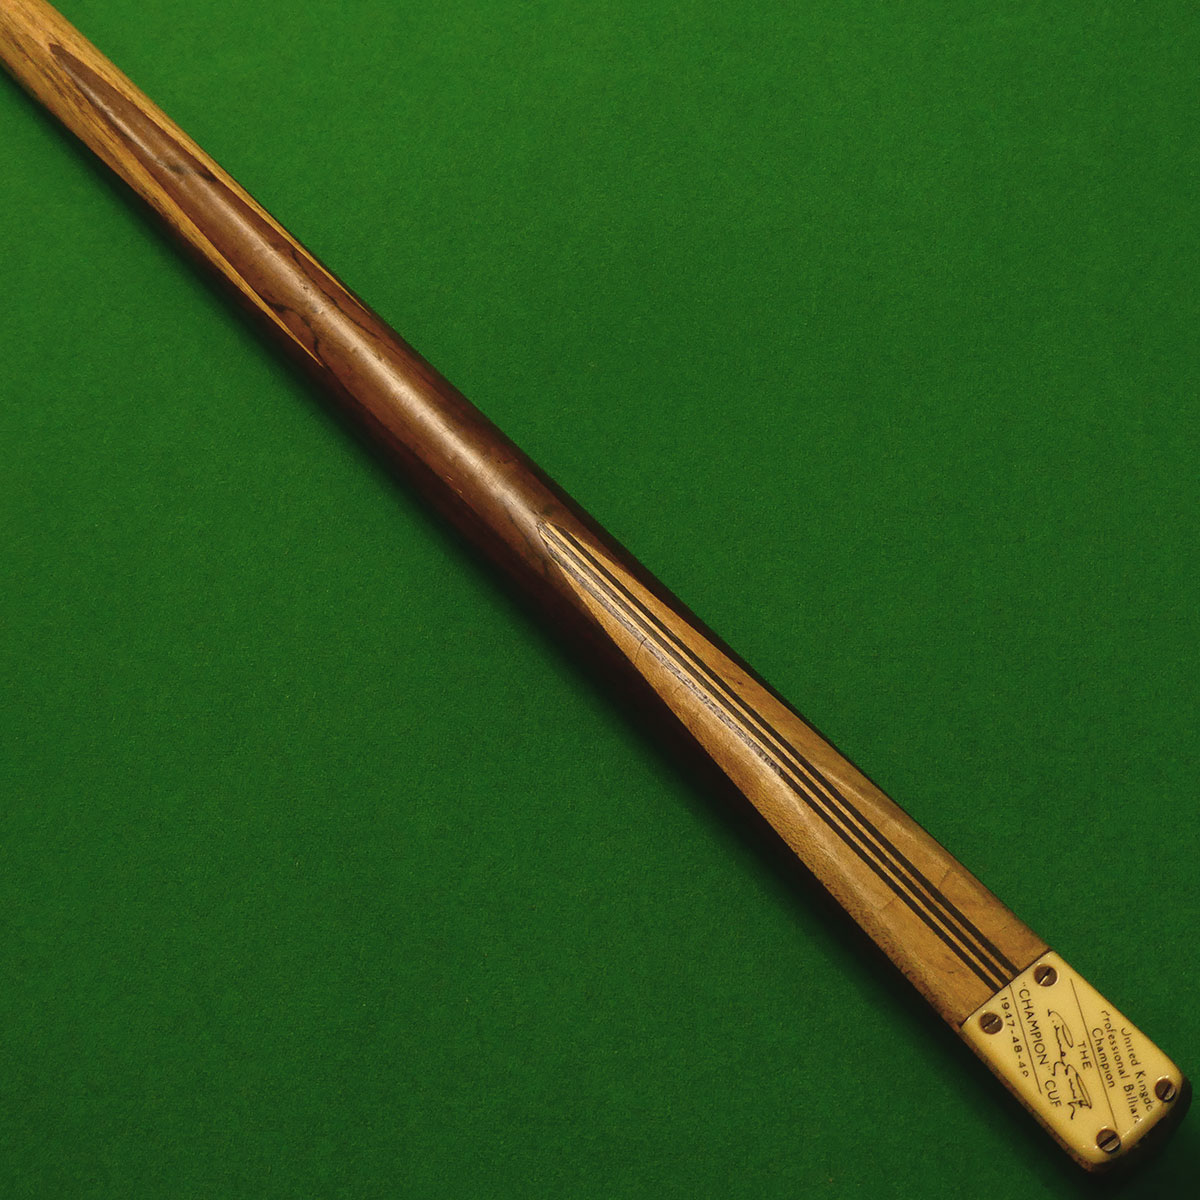 Sidney Smith Champion cue 1947-48-49 - Rosewood